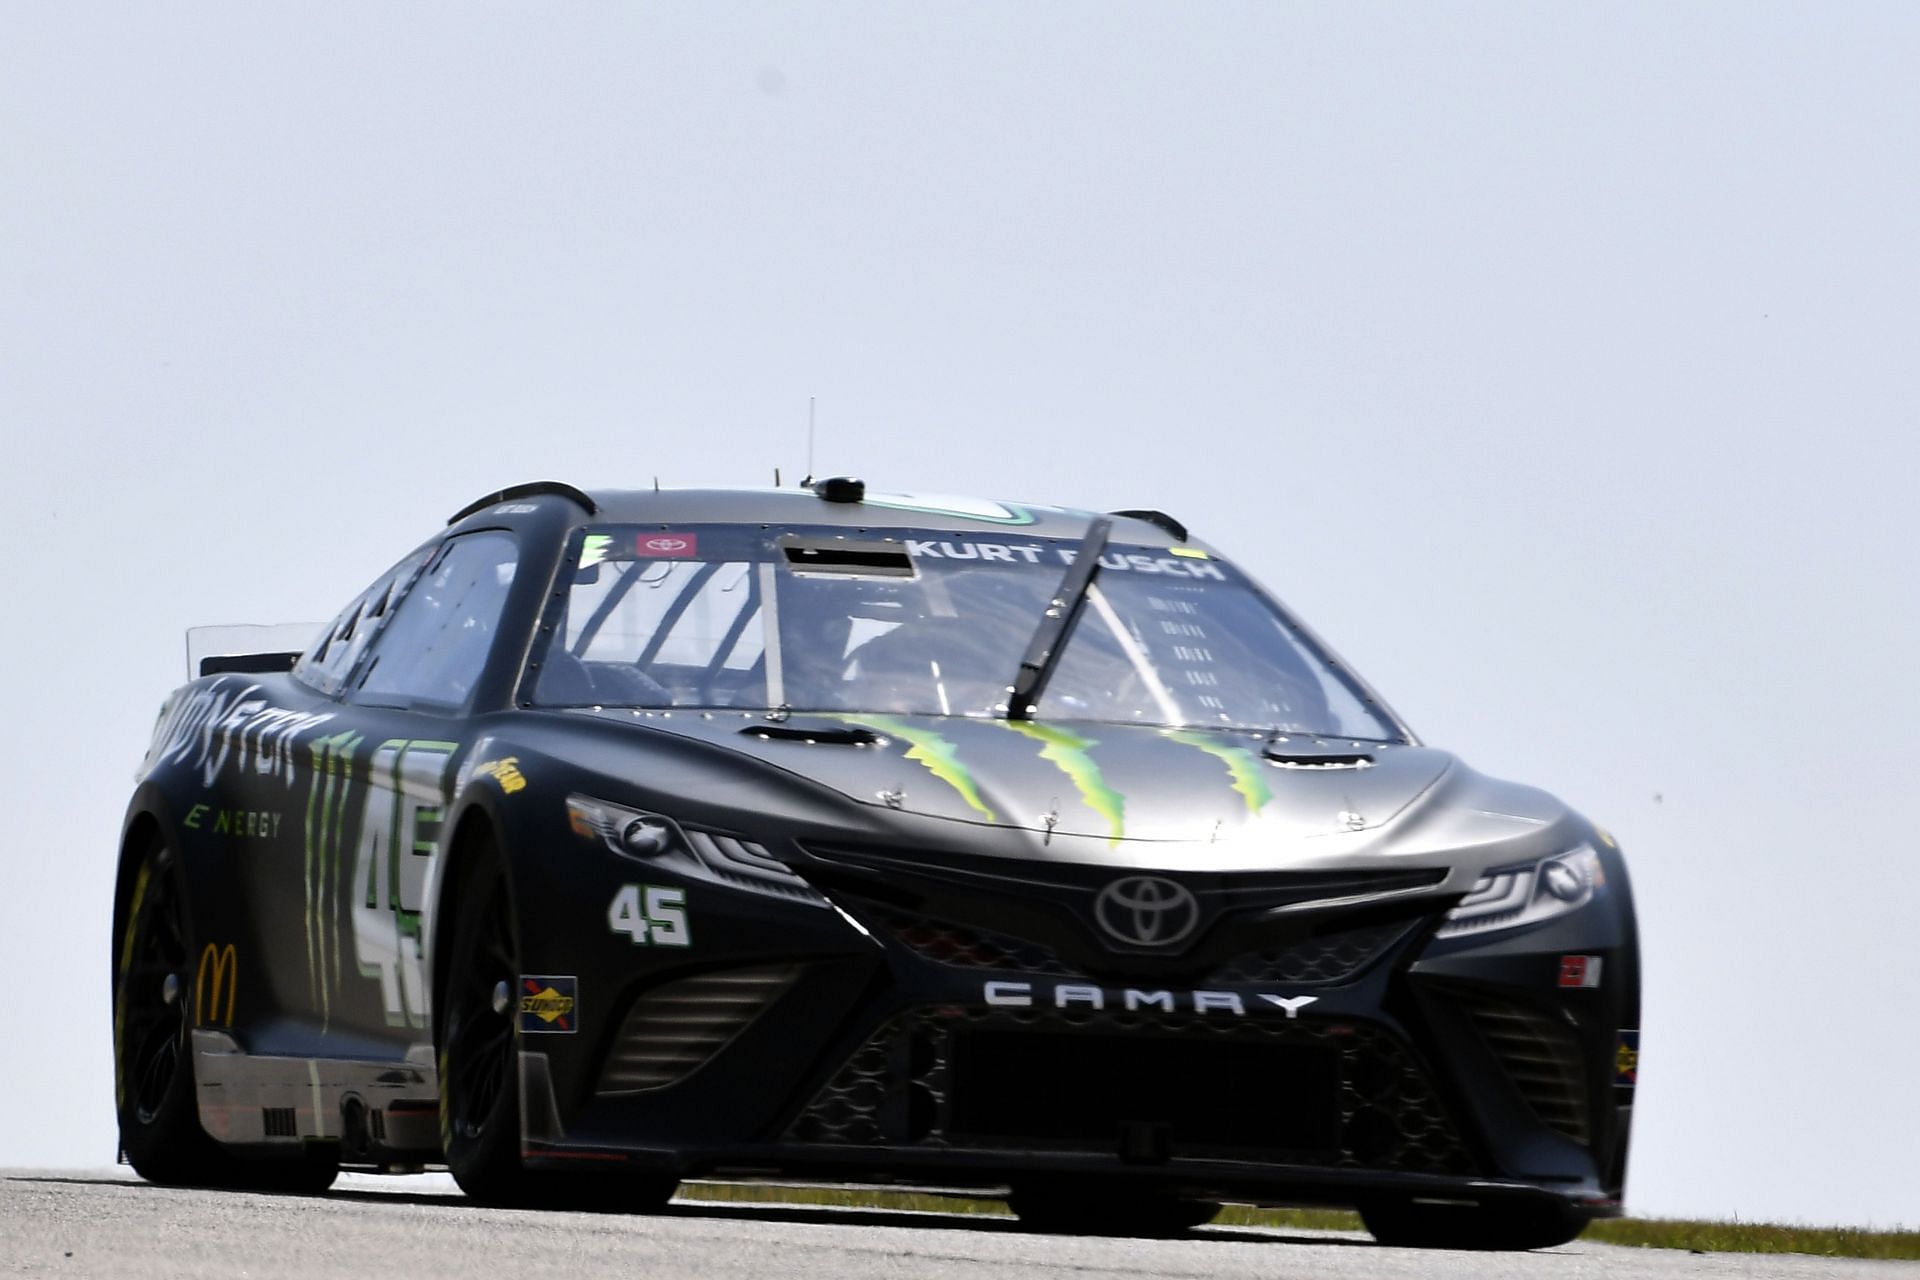 Kurt Busch drives during practice for the 2022 NASCAR Cup Series Kwik Trip 250 at Road America in Elkhart Lake, Wisconsin (Photo by Logan Riely/Getty Images)